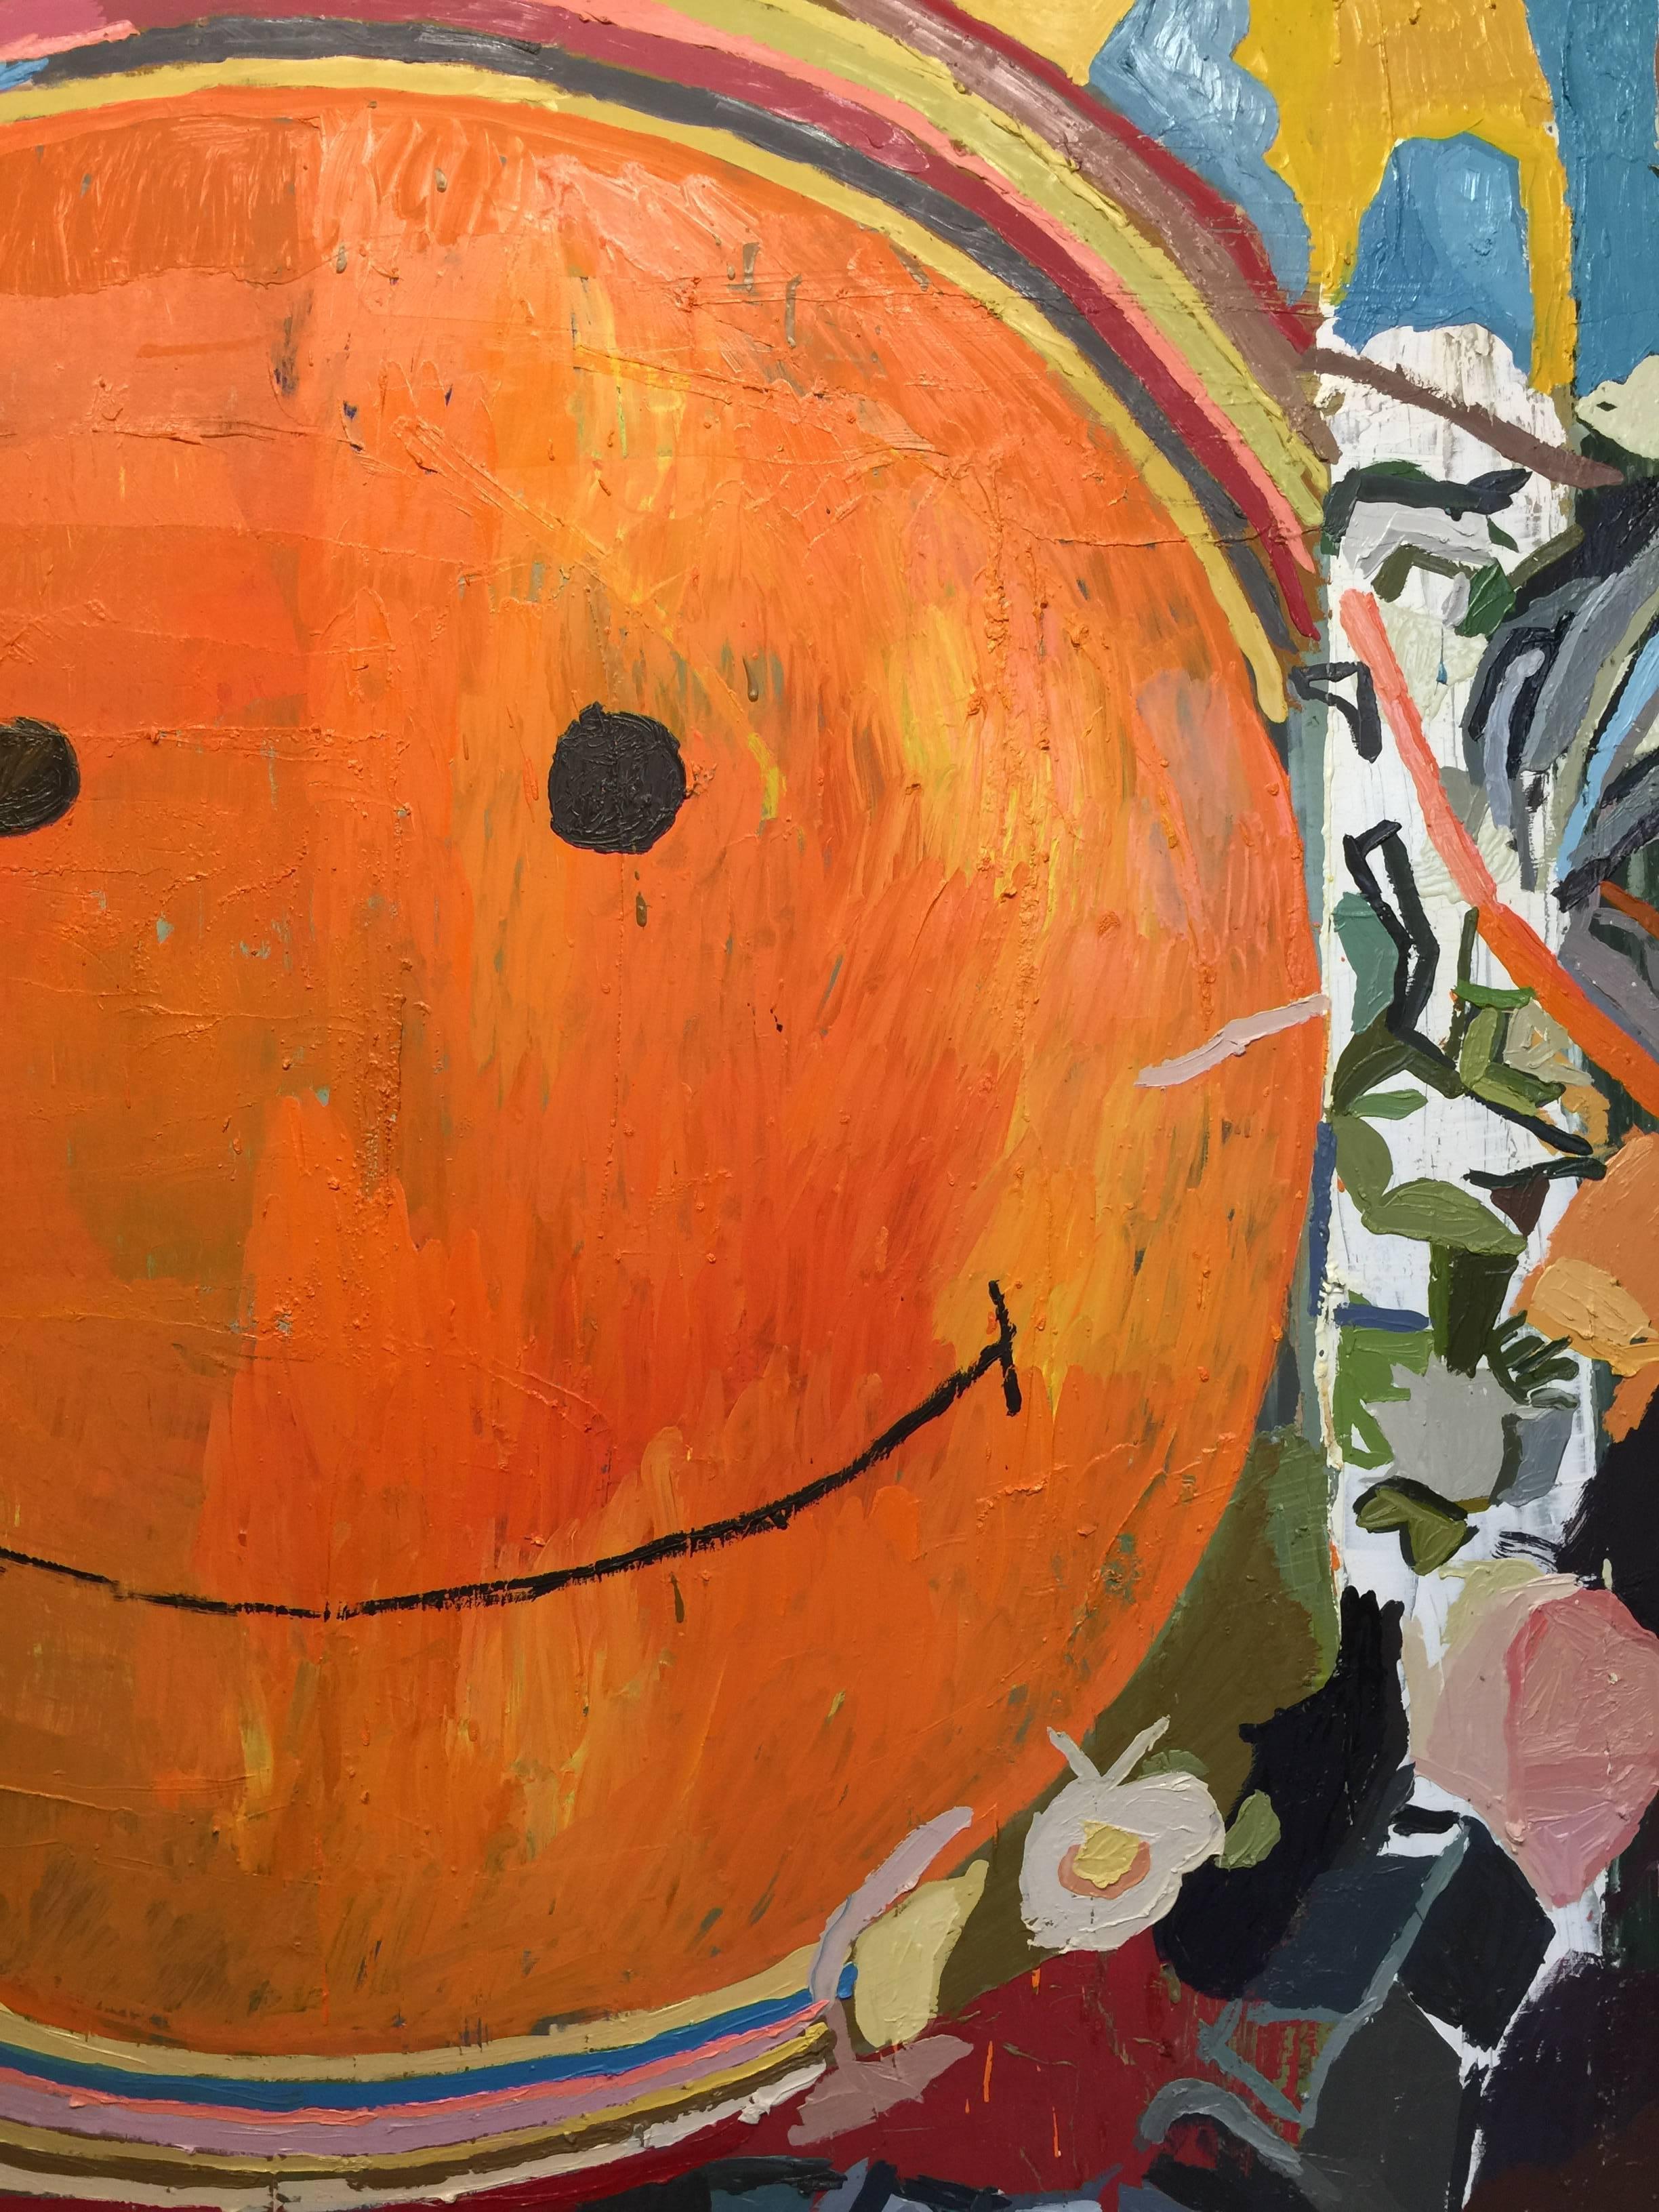 American Pharoah and Smiley Face Oil Painting by NYC Artist Clintel Steed, 2015 4